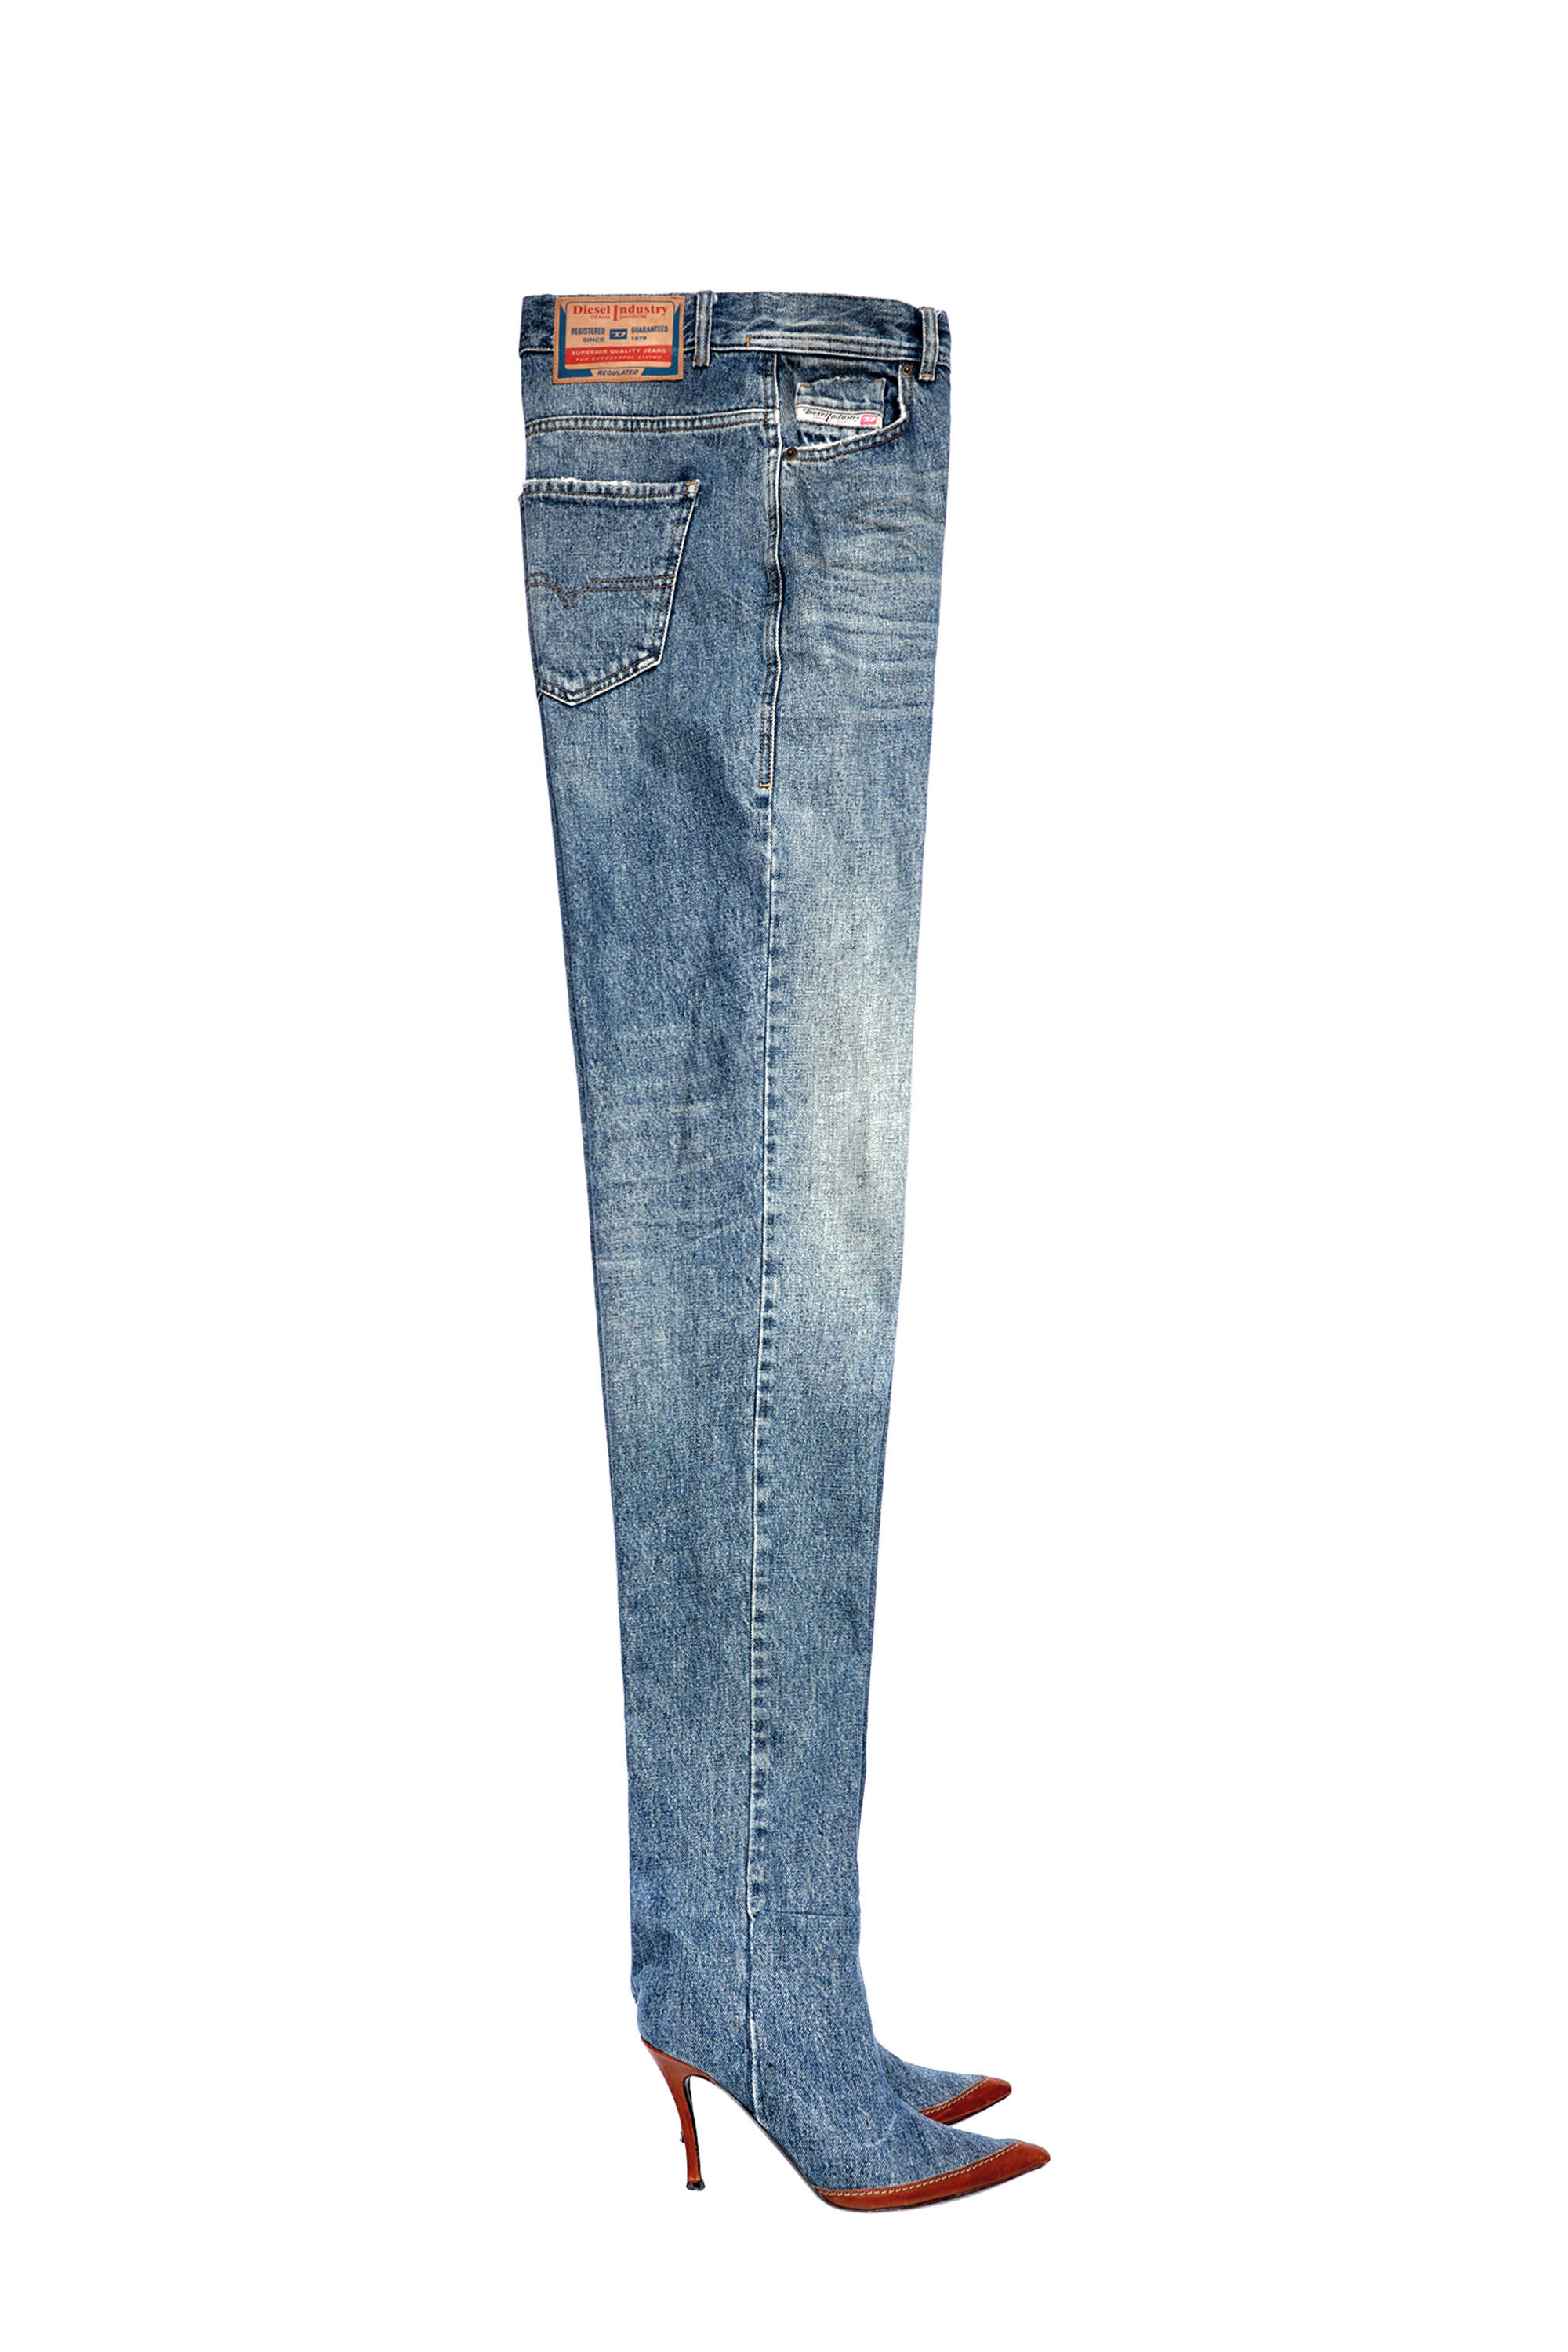 Straight Medium blue Woman Jeans with denim boots: 1956 007A7 | Diesel